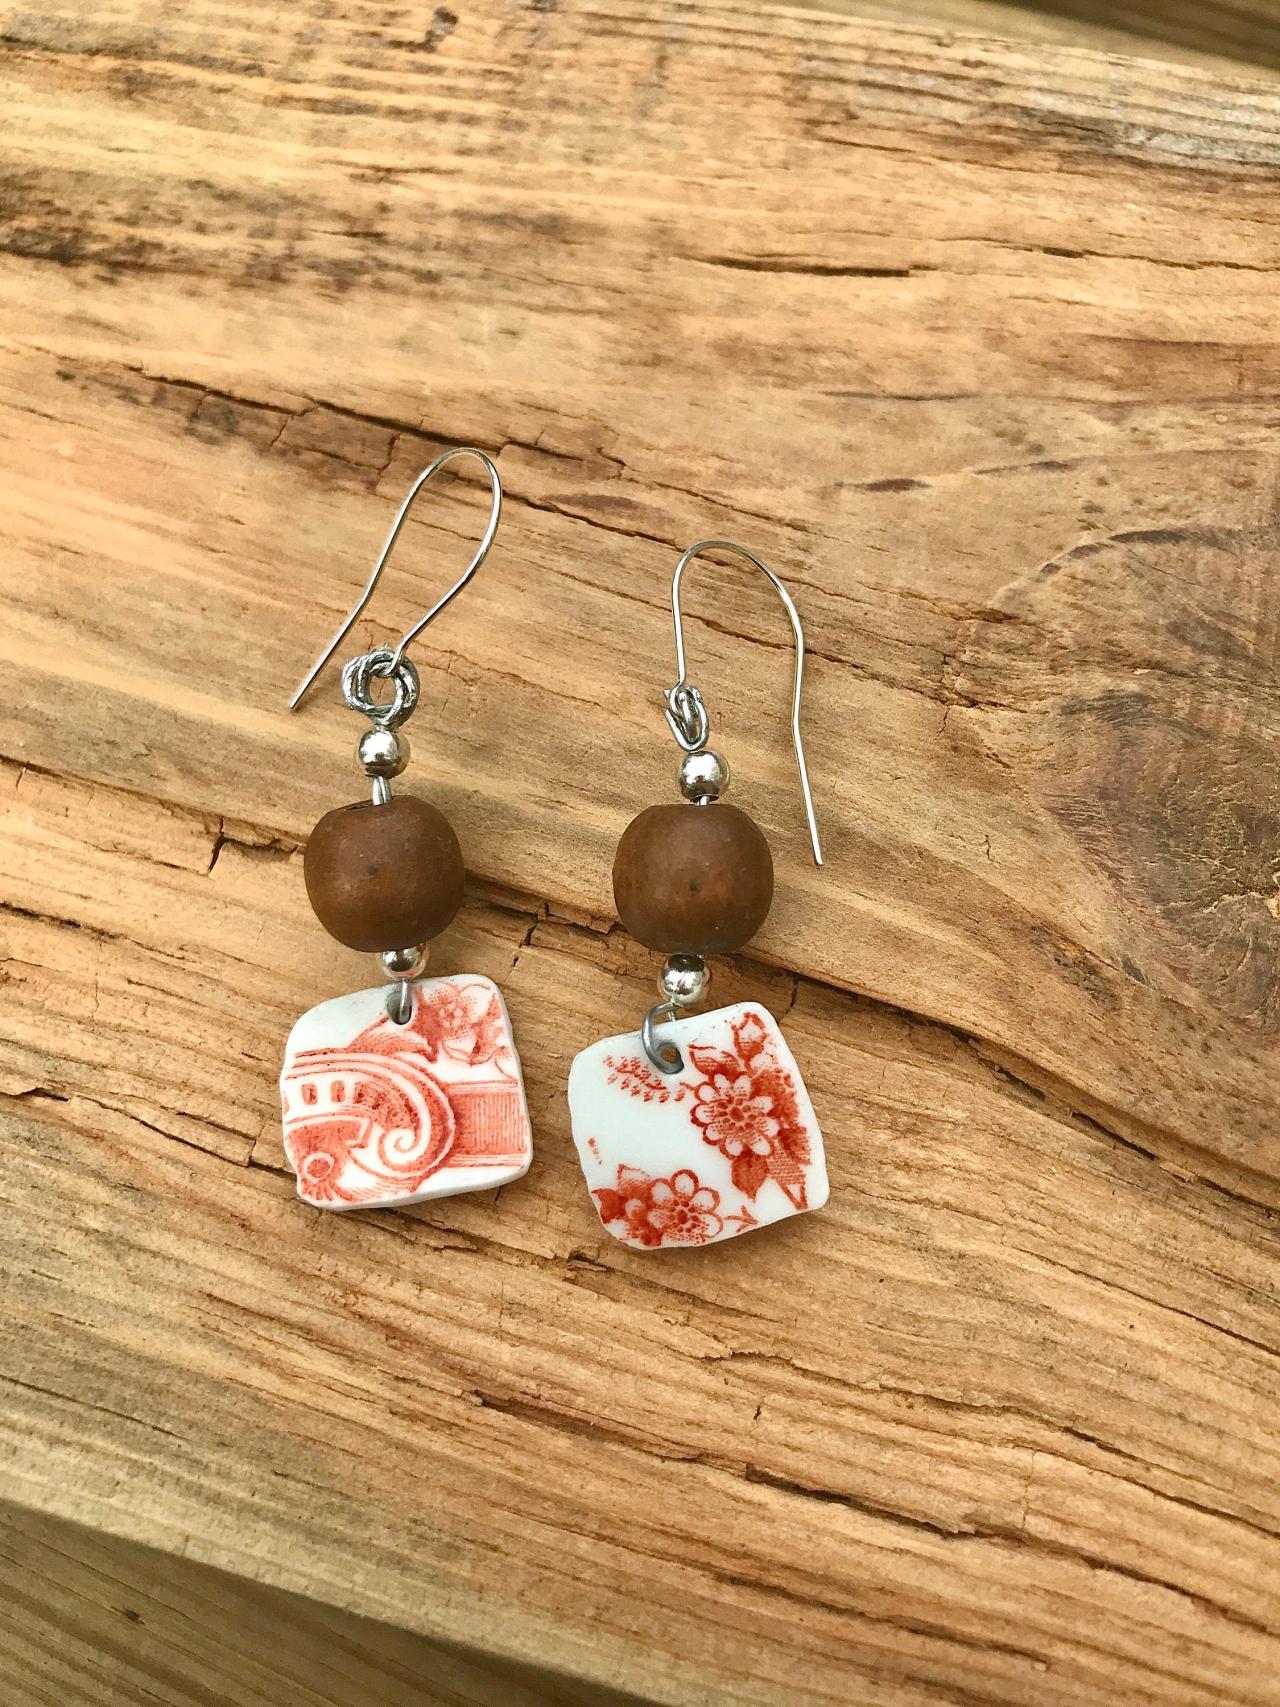 Gorgeous Wood Bead & Orange Vintage Recycled Broken China Earrings With Sterling Silver Wires.